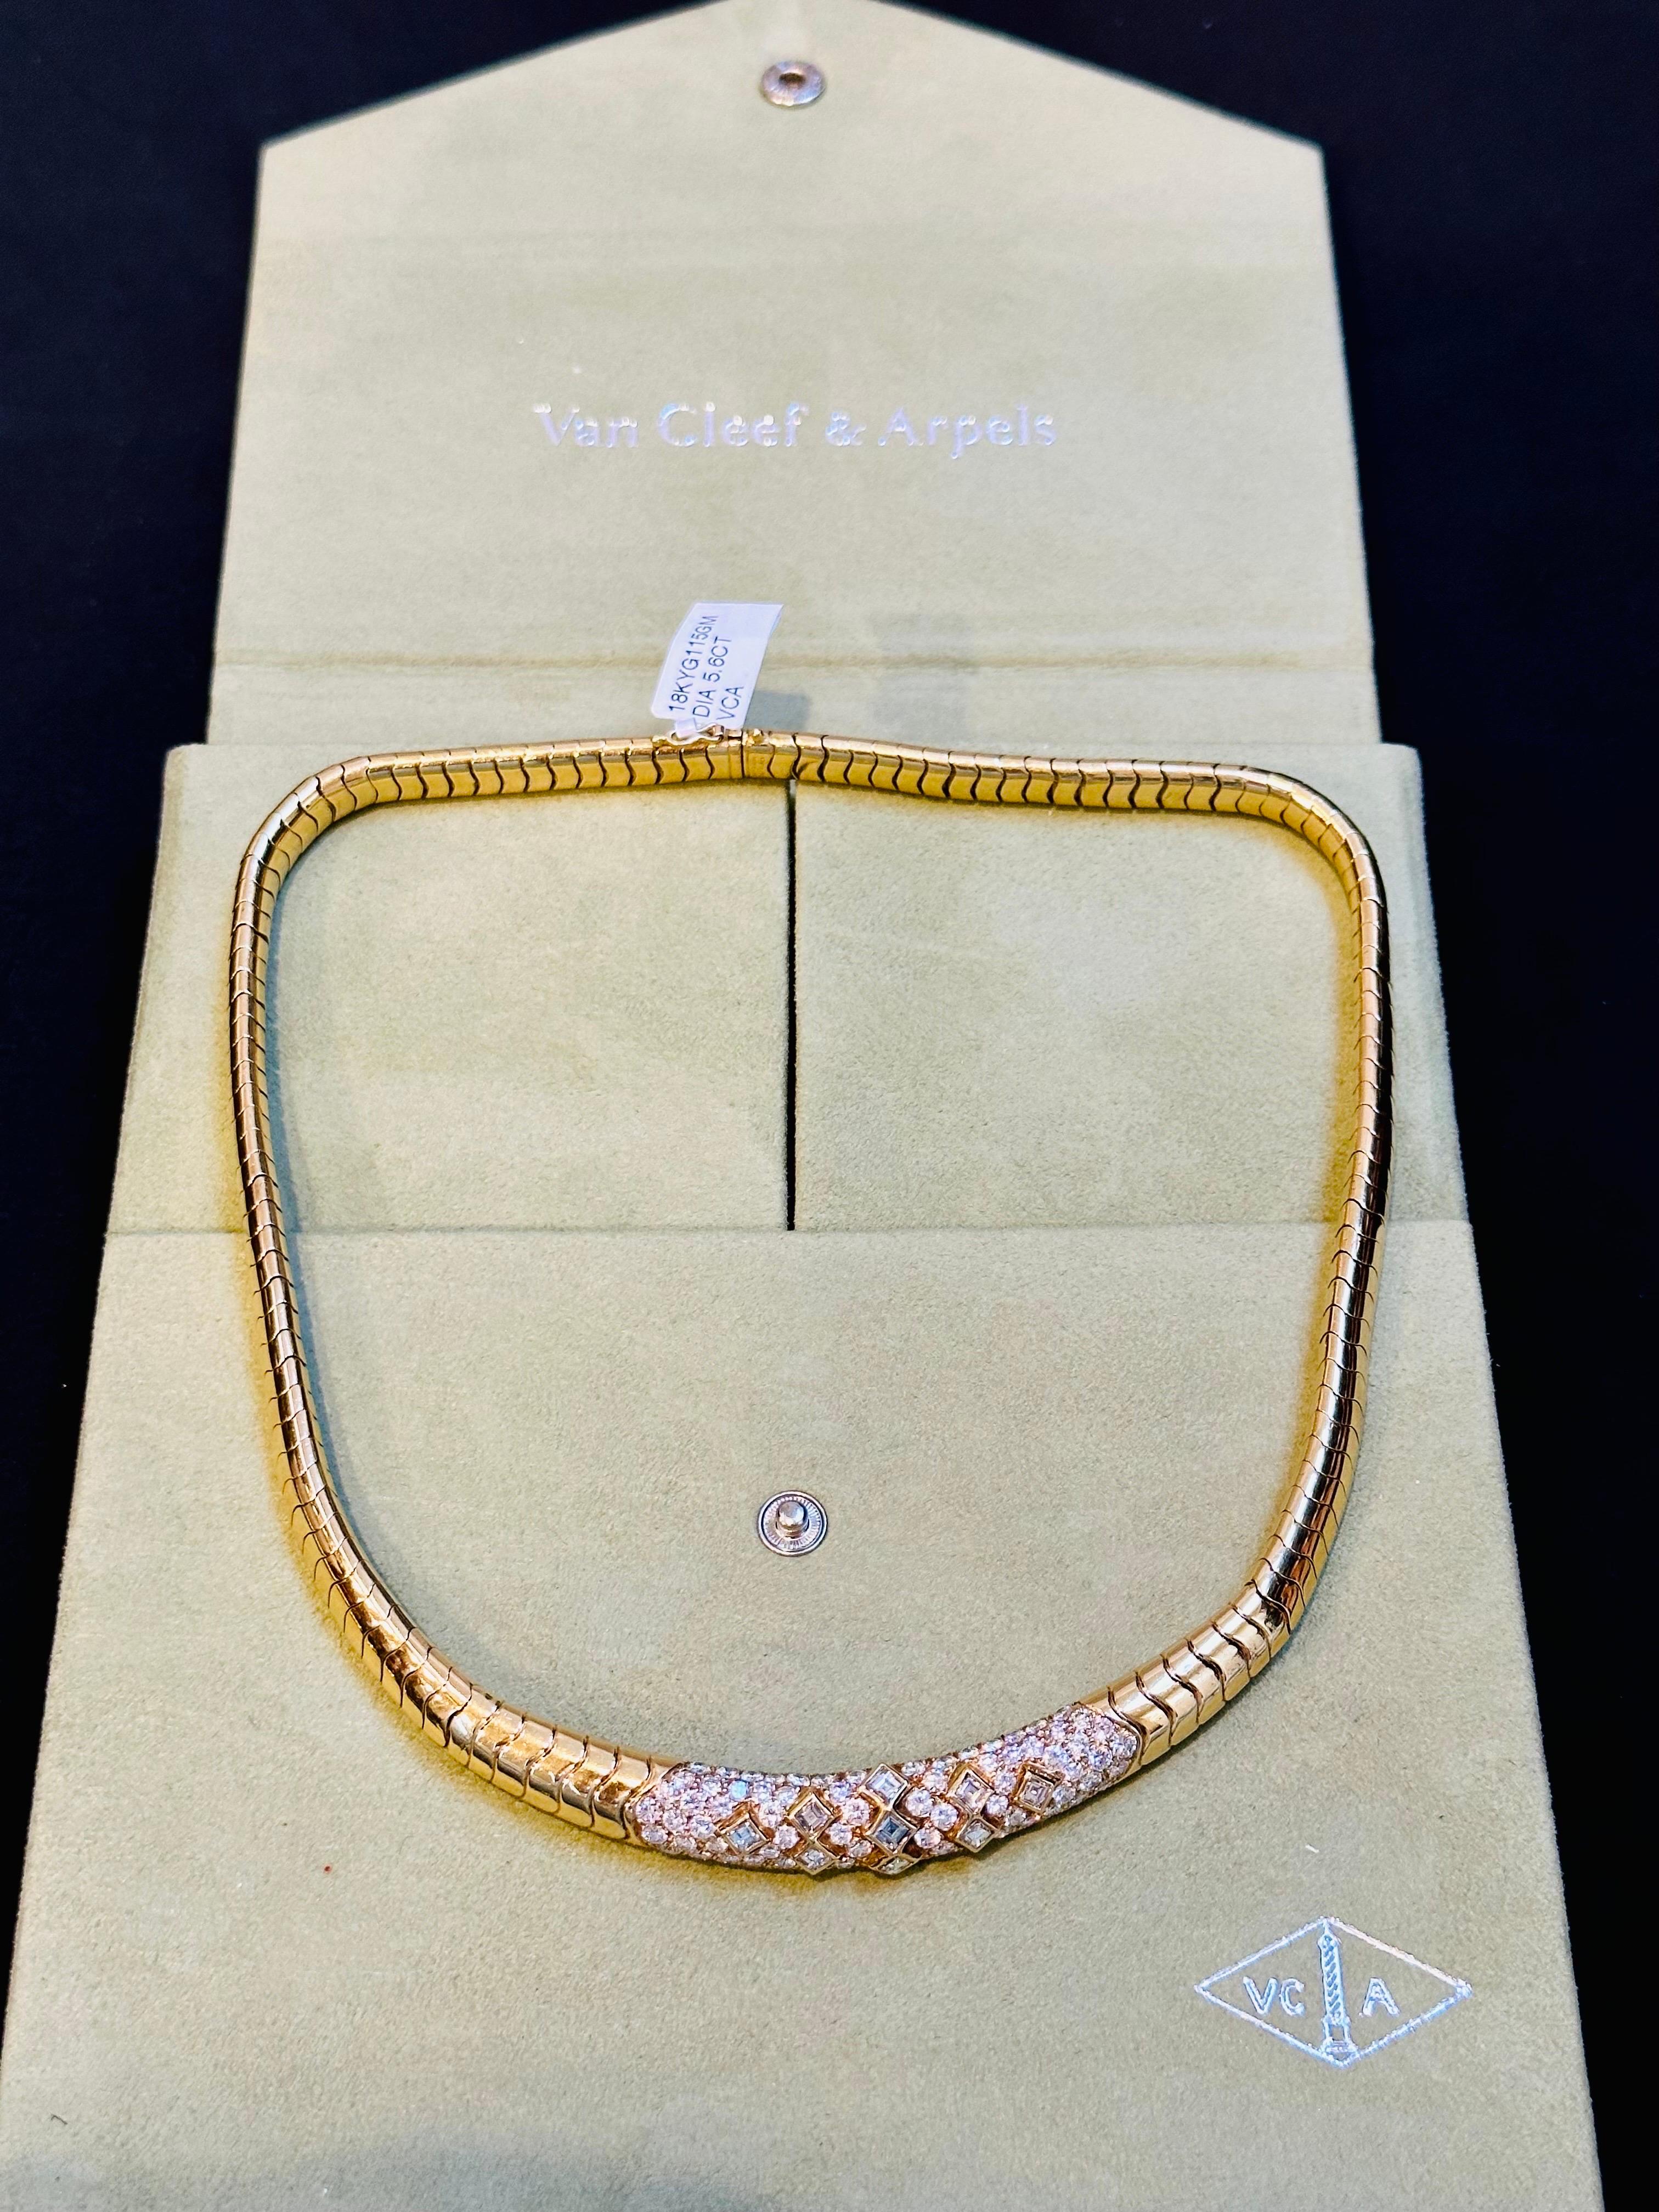 Van Cleef & Arpels 18 Kt Yellow Gold and  5.6 Ct Diamond Collar/Choker Necklace For Sale 13